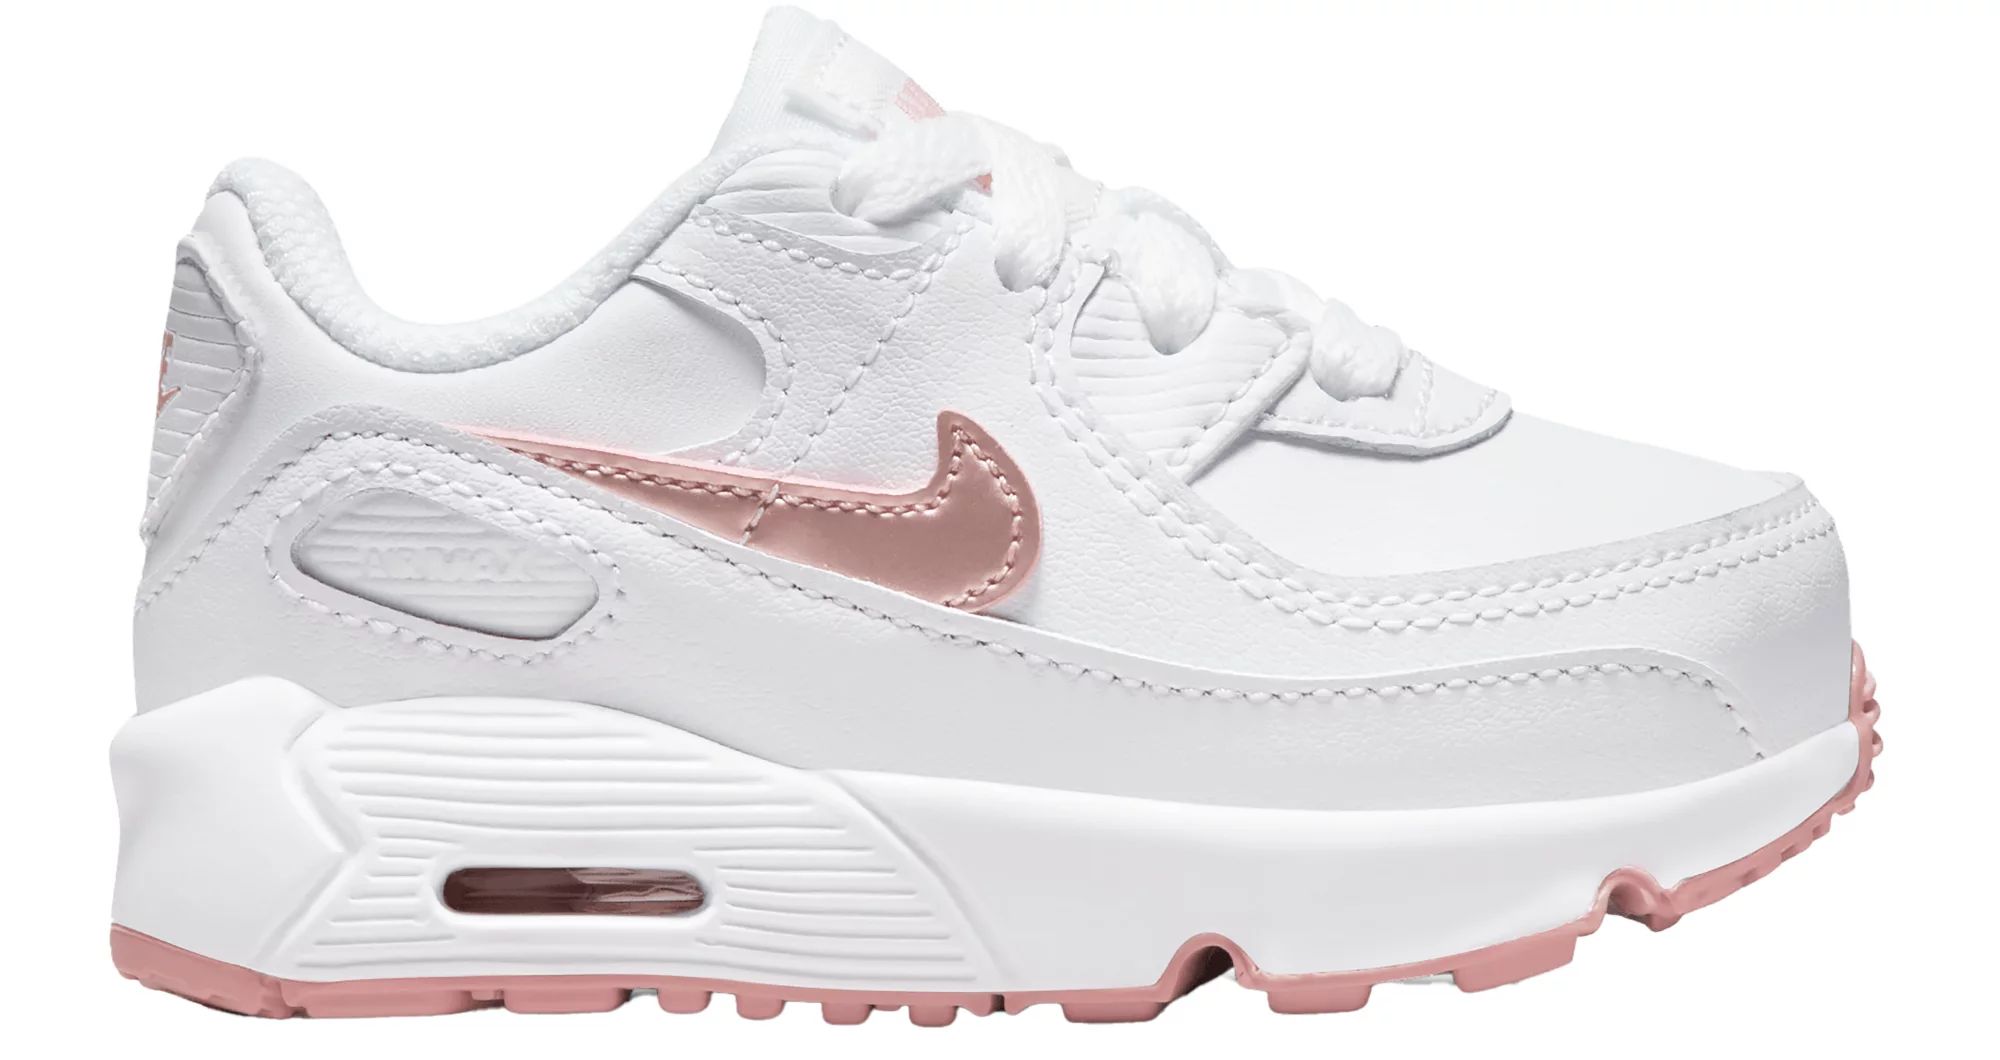 Nike Toddler Air Max 90 Shoes, Boys', Solid White | Dick's Sporting Goods